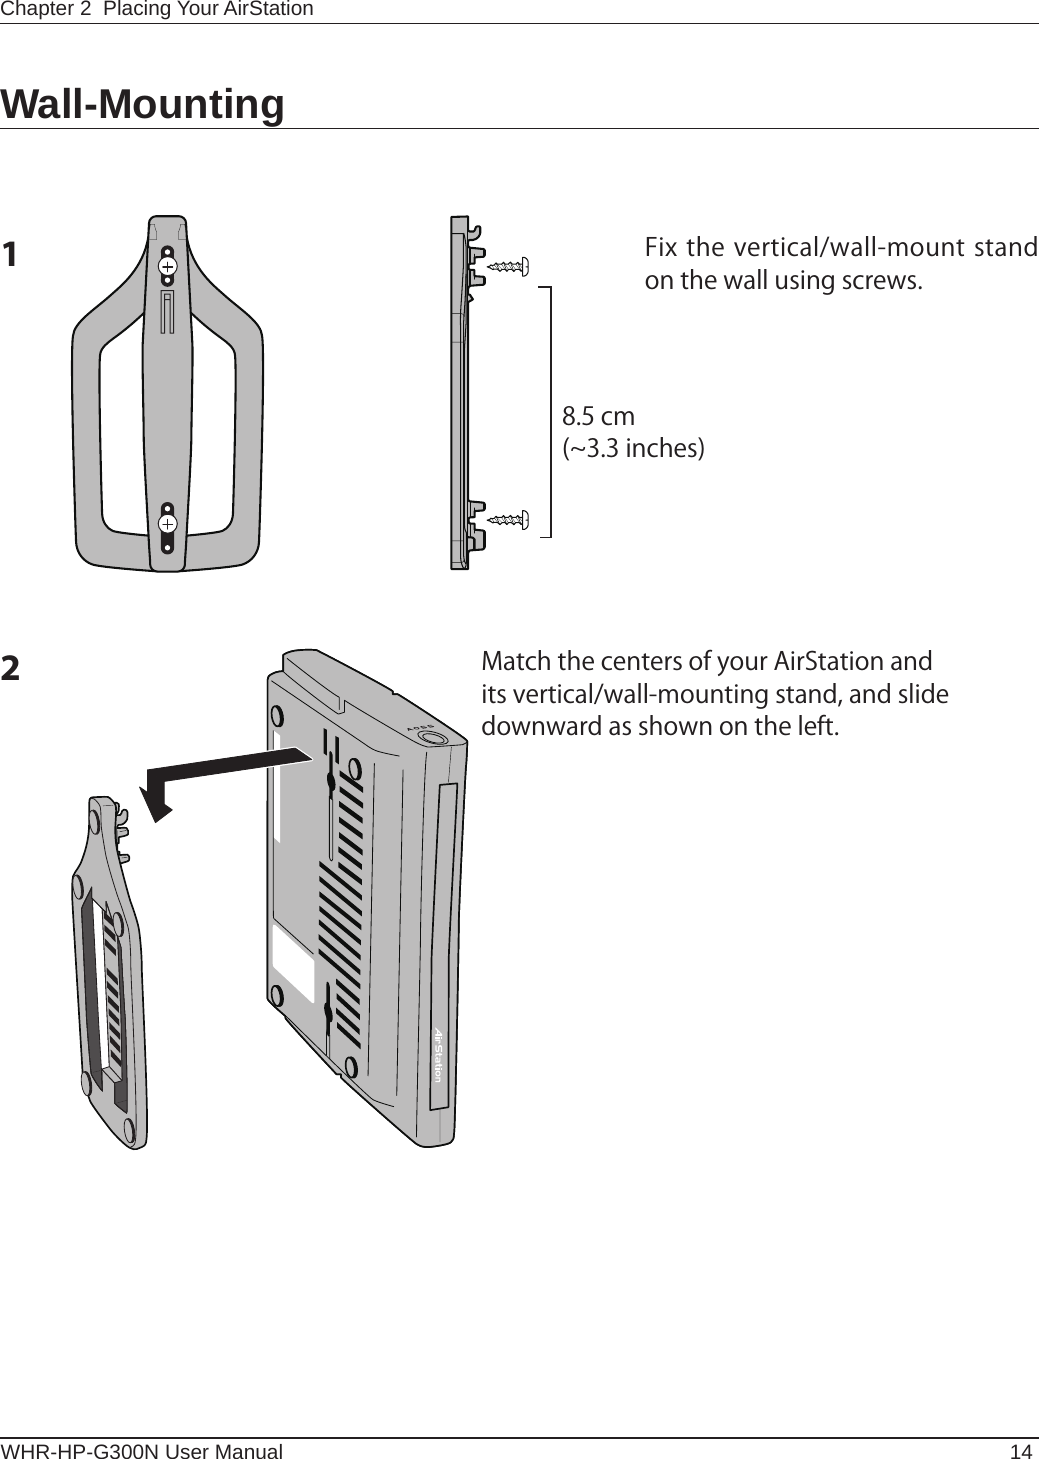 WHR-HP-G300N User Manual 14Chapter 2  Placing Your AirStationWall-Mounting1Fix the vertical/wall-mount stand on the wall using screws.8.5 cm(~3.3 inches)2Match the centers of your AirStation and its vertical/wall-mounting stand, and slide downward as shown on the left.